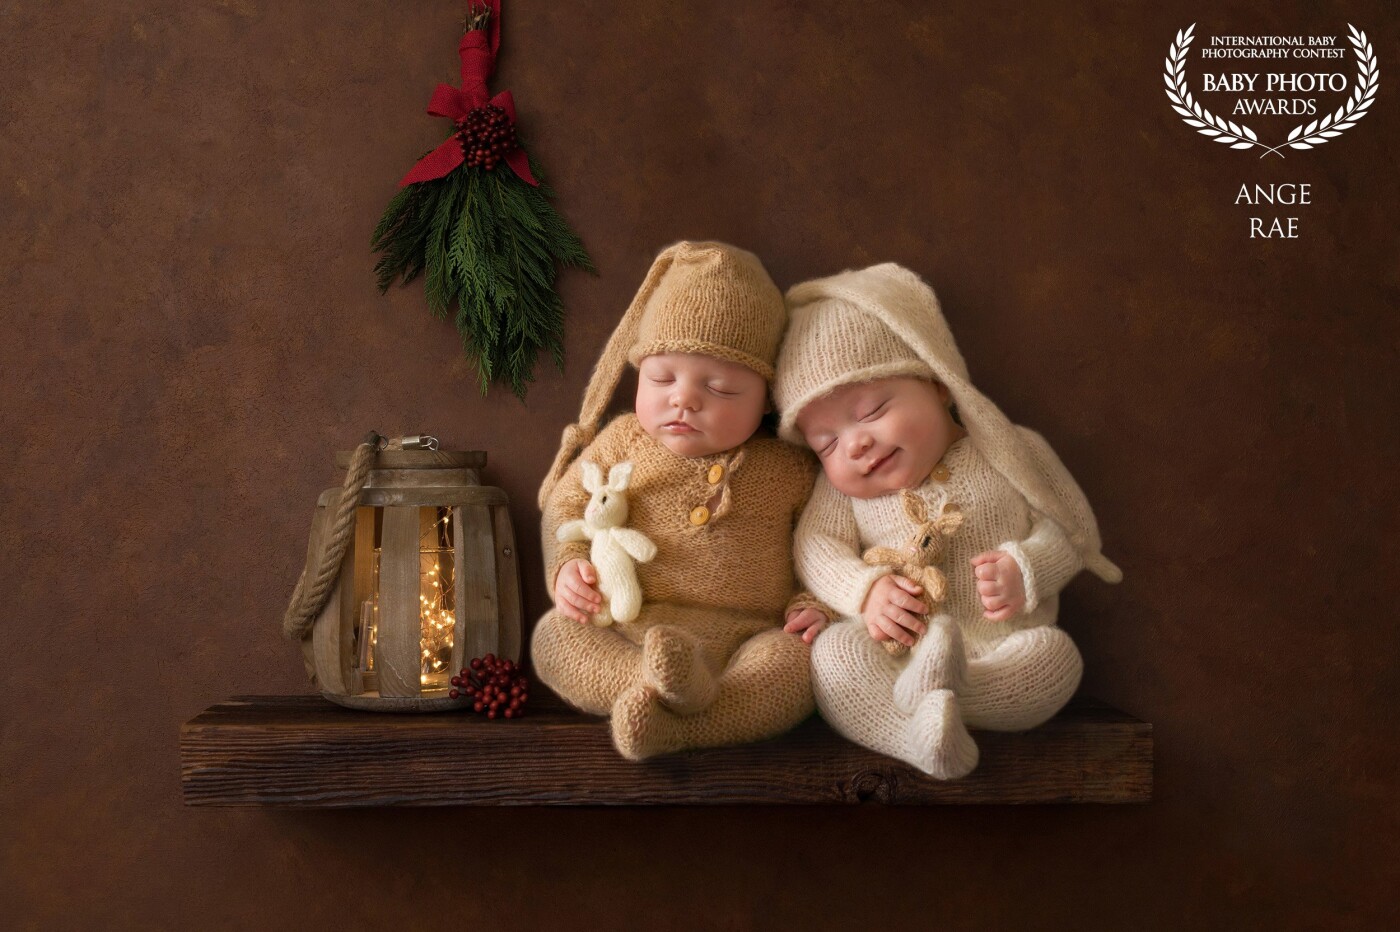 Meet little Kobe and La Melo! These darling little boys kept taking turns smiling throughout their session - the cuteness was too much to bear! So much so that I asked them to come back so that we could create this little moment to celebrate their very first Christmas. 